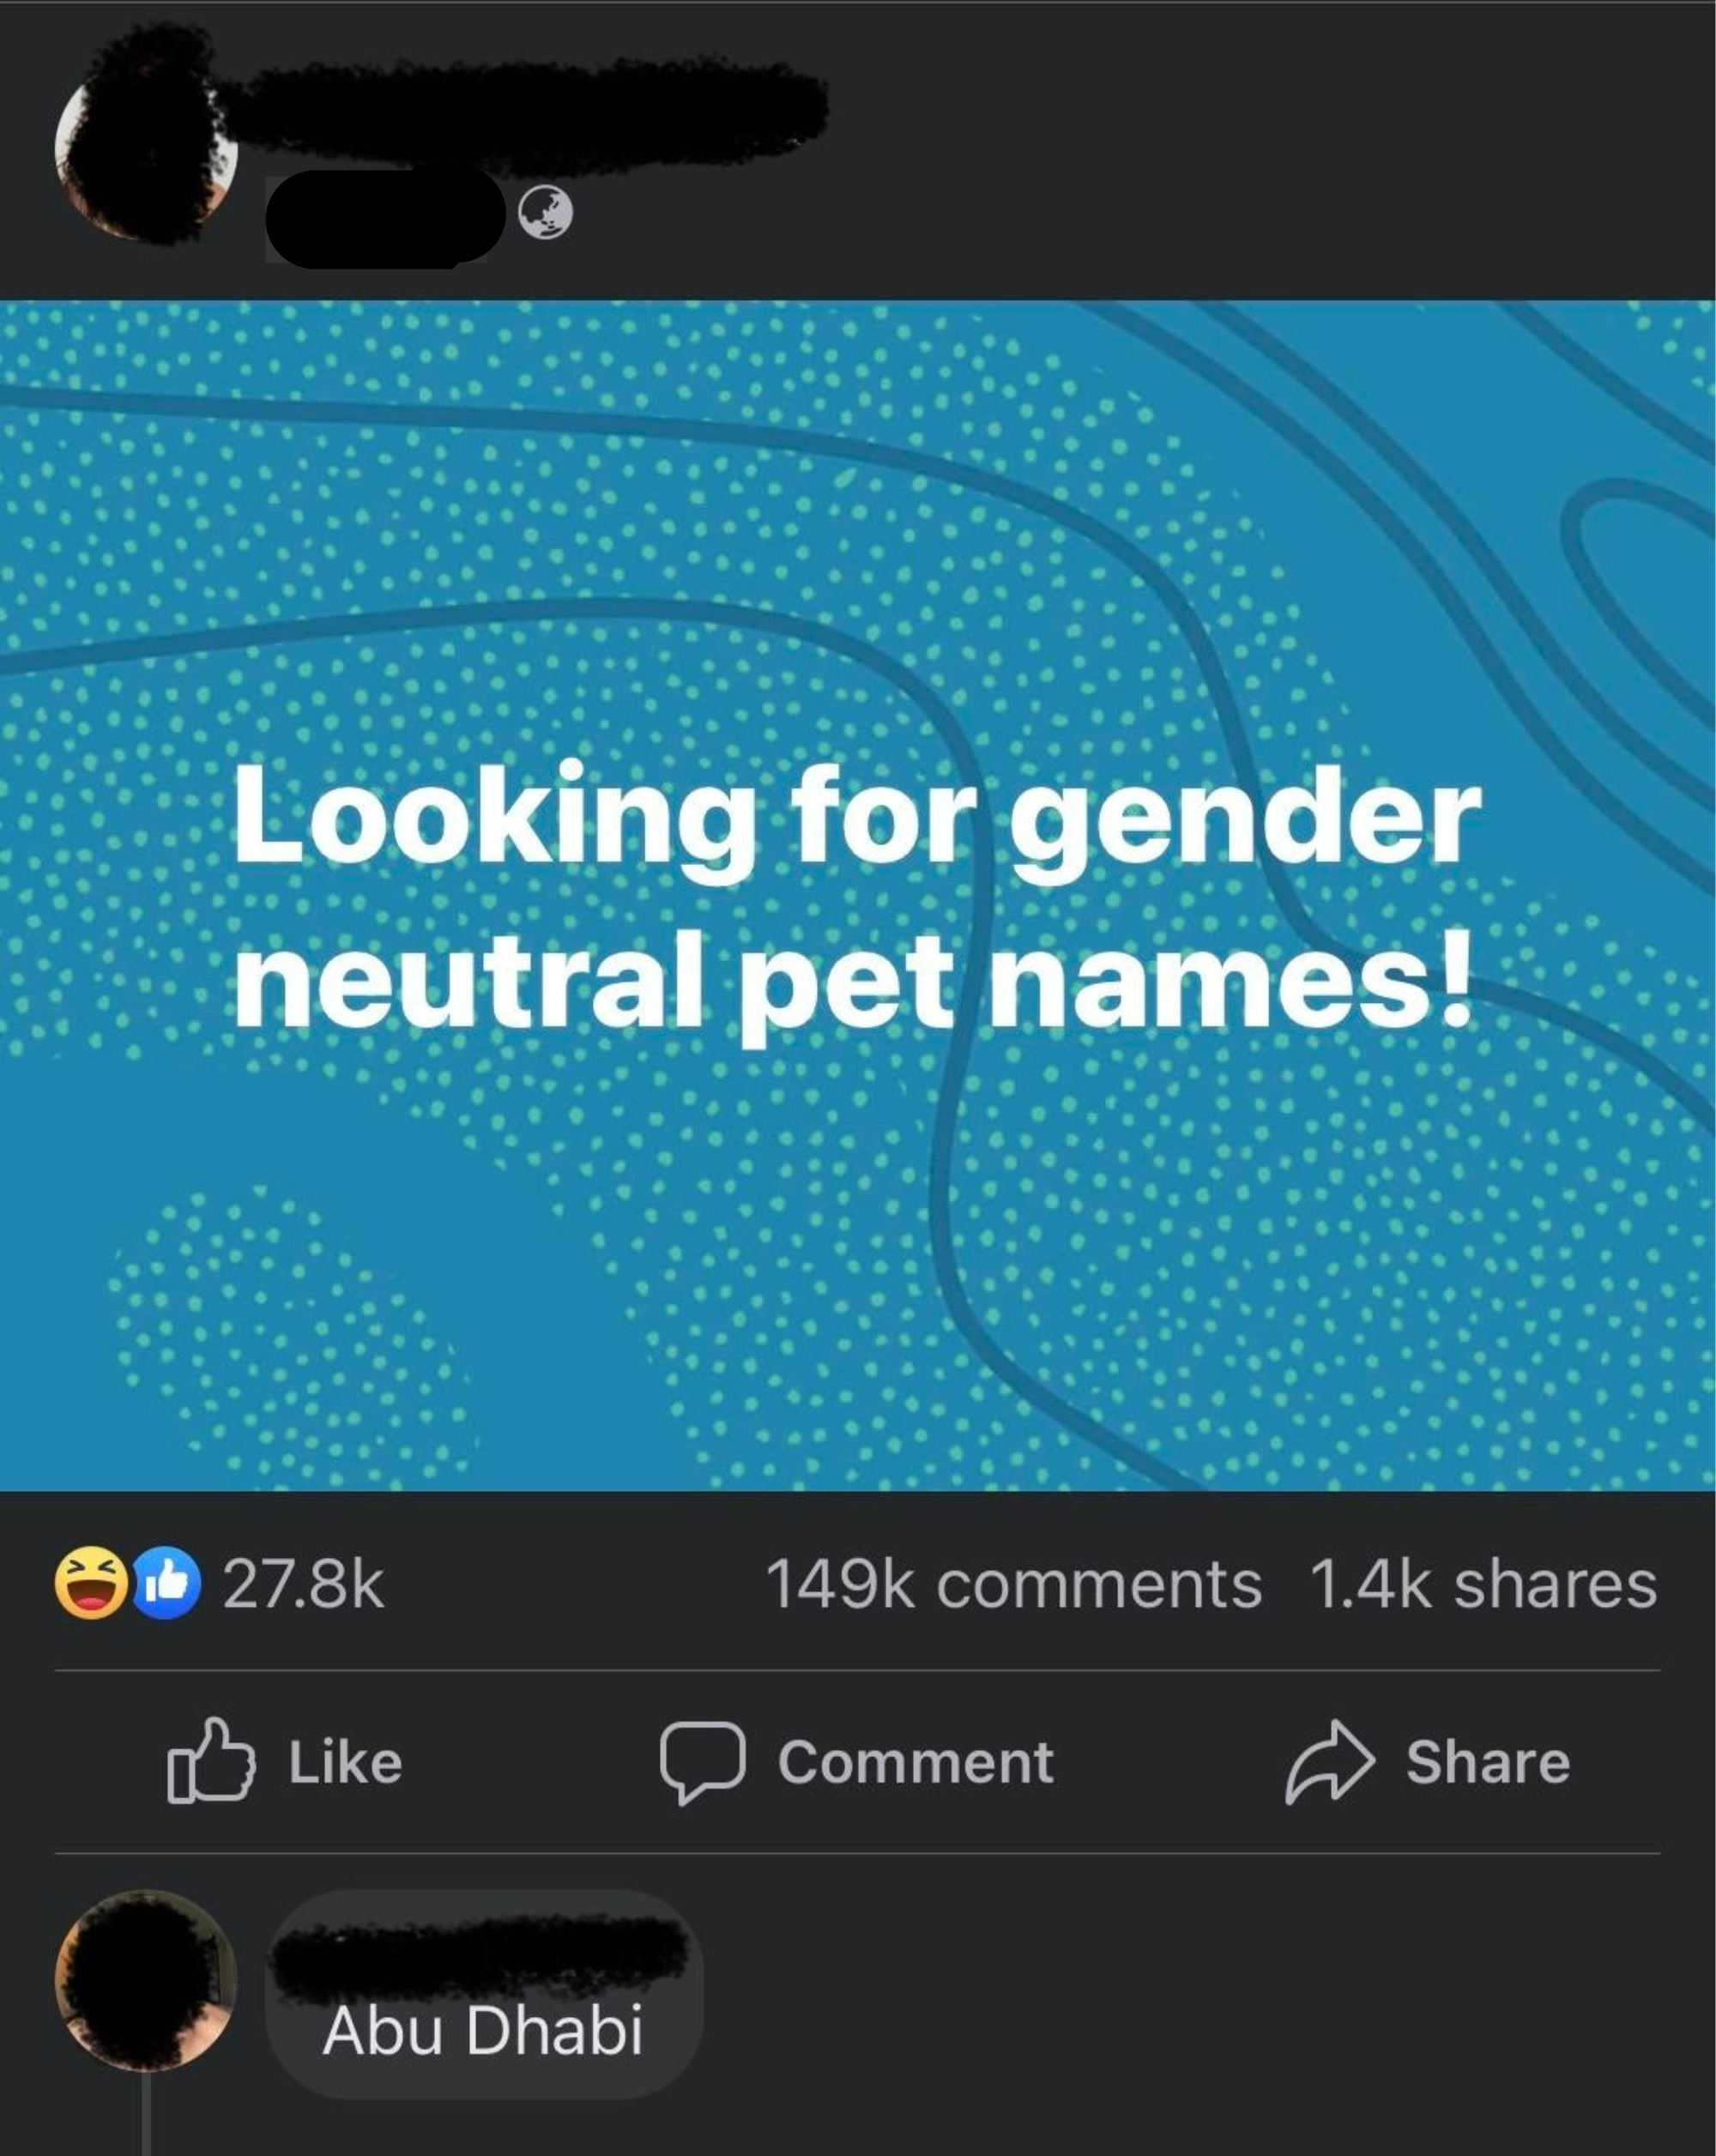 &quot;Looking for gender-neutral pet names&quot;; response: Abu Dhabi